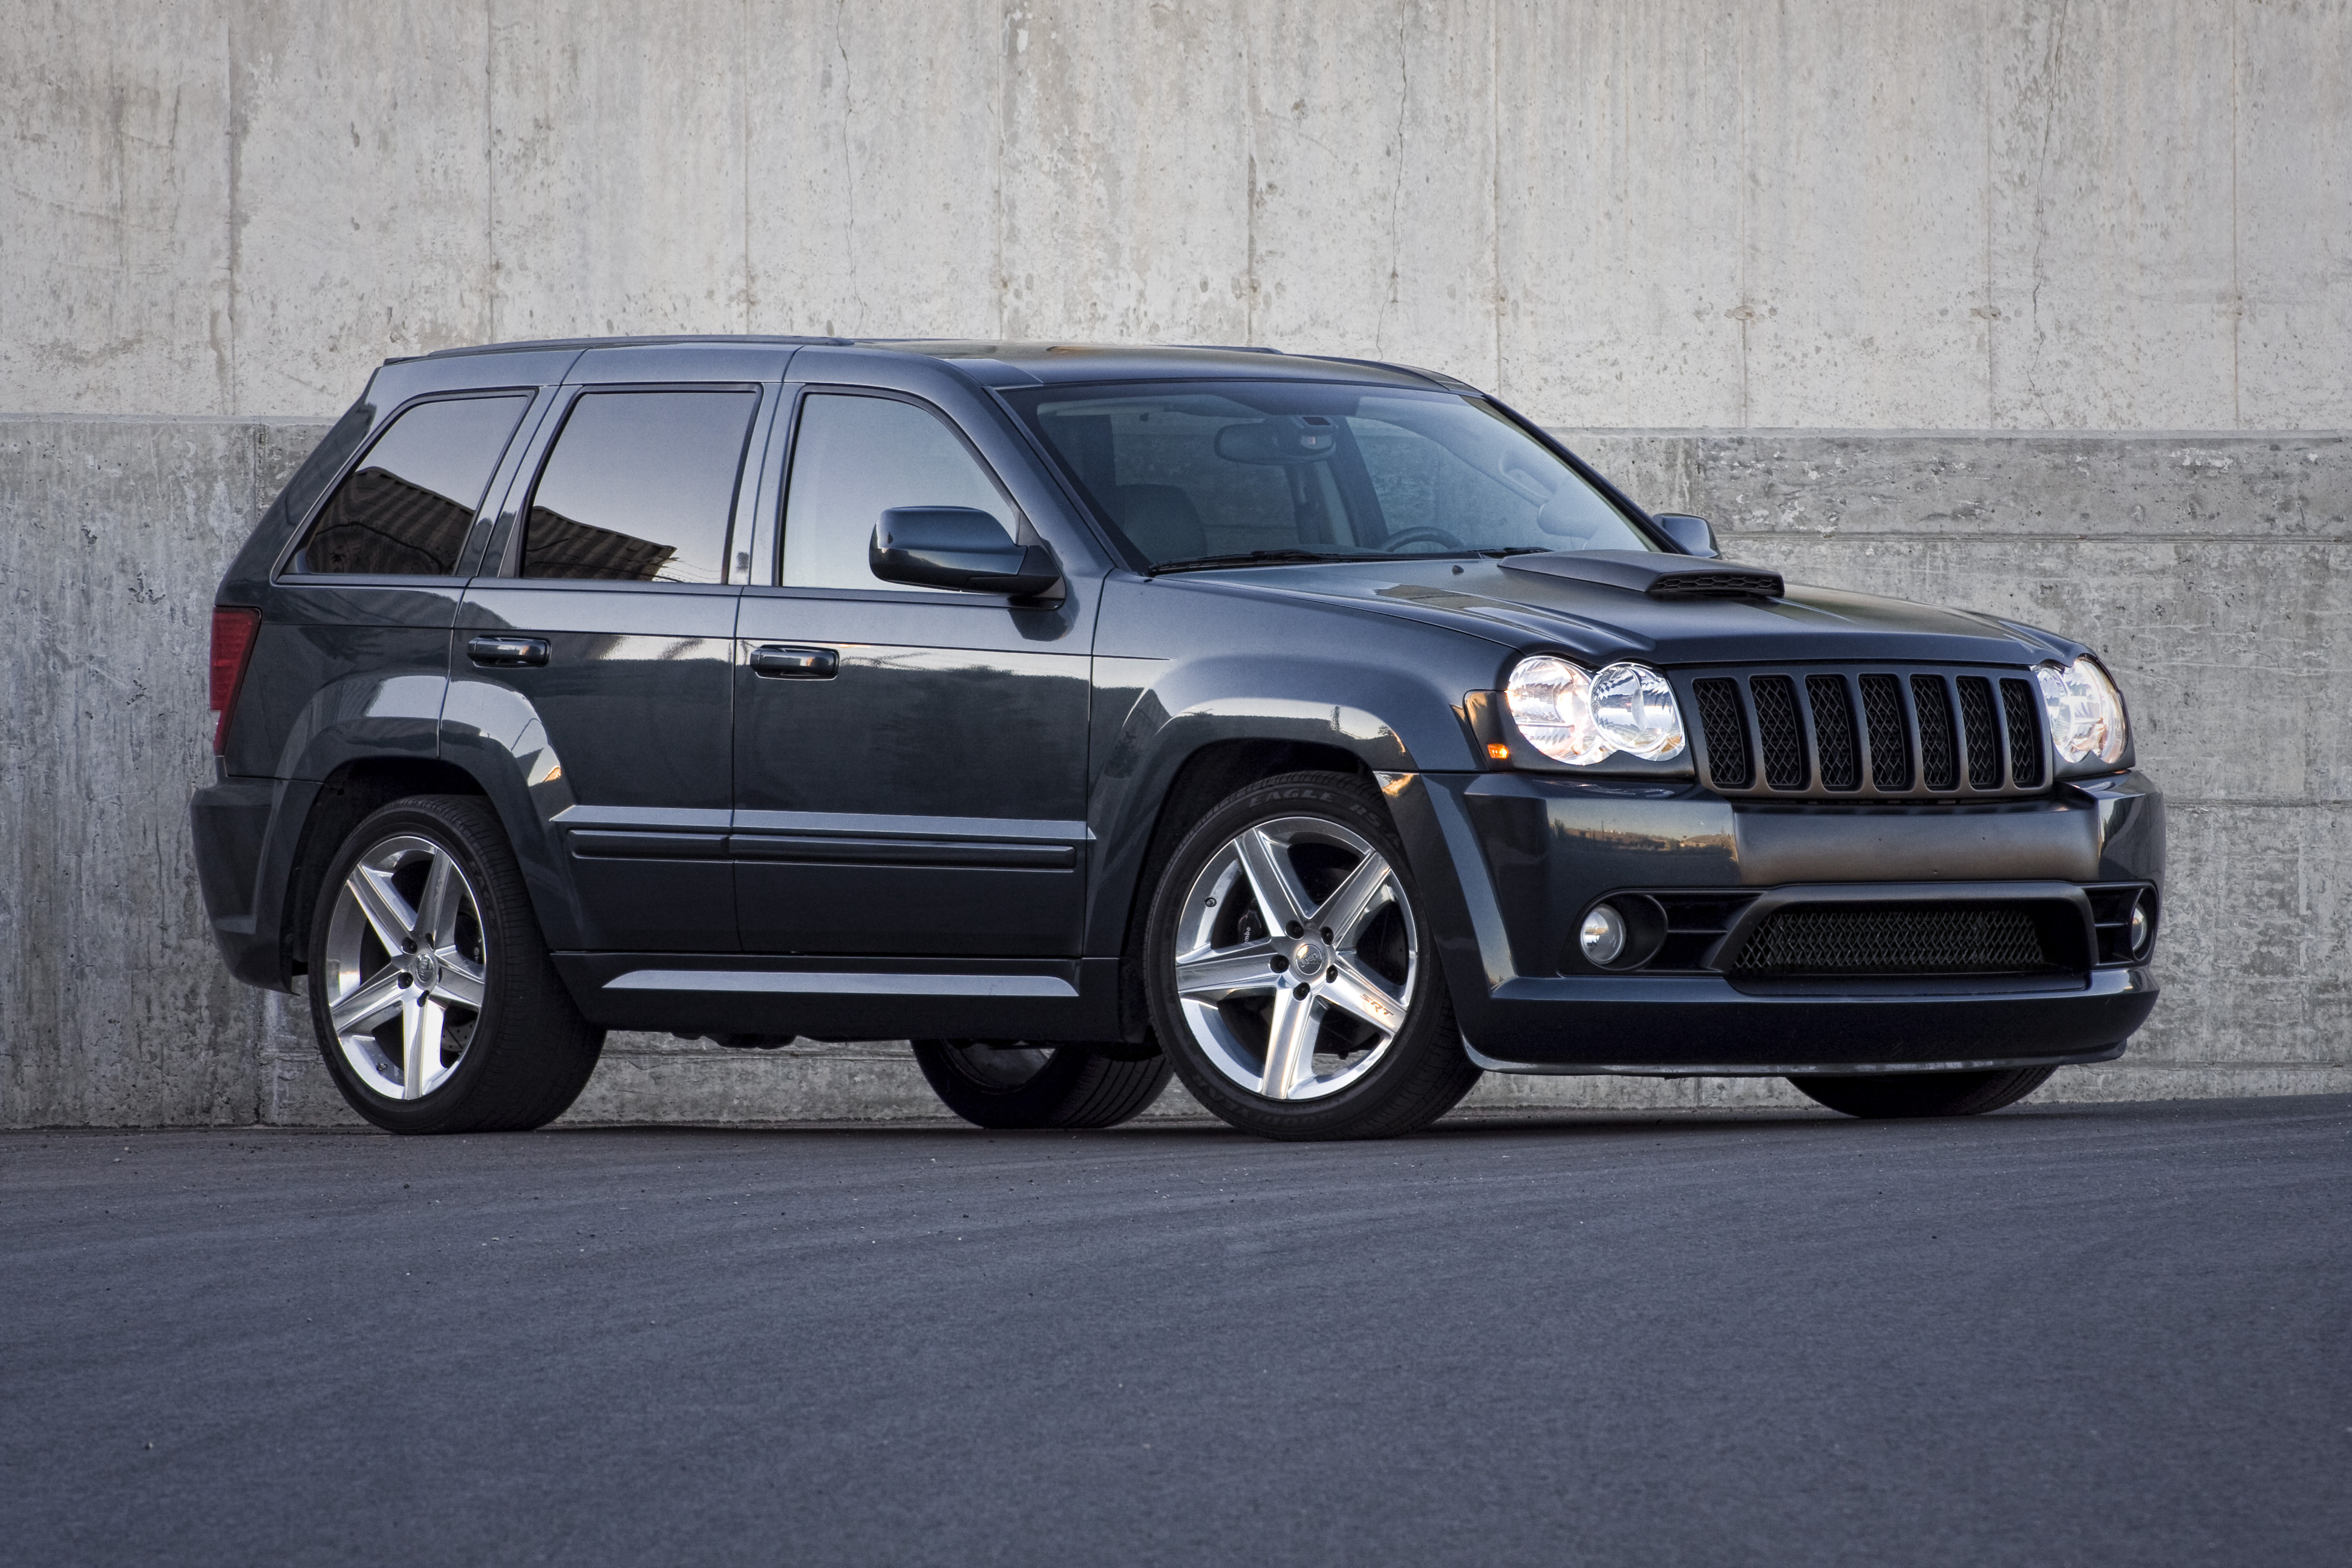 Jeep grand cherokee srt8 2012 price in south africa #5